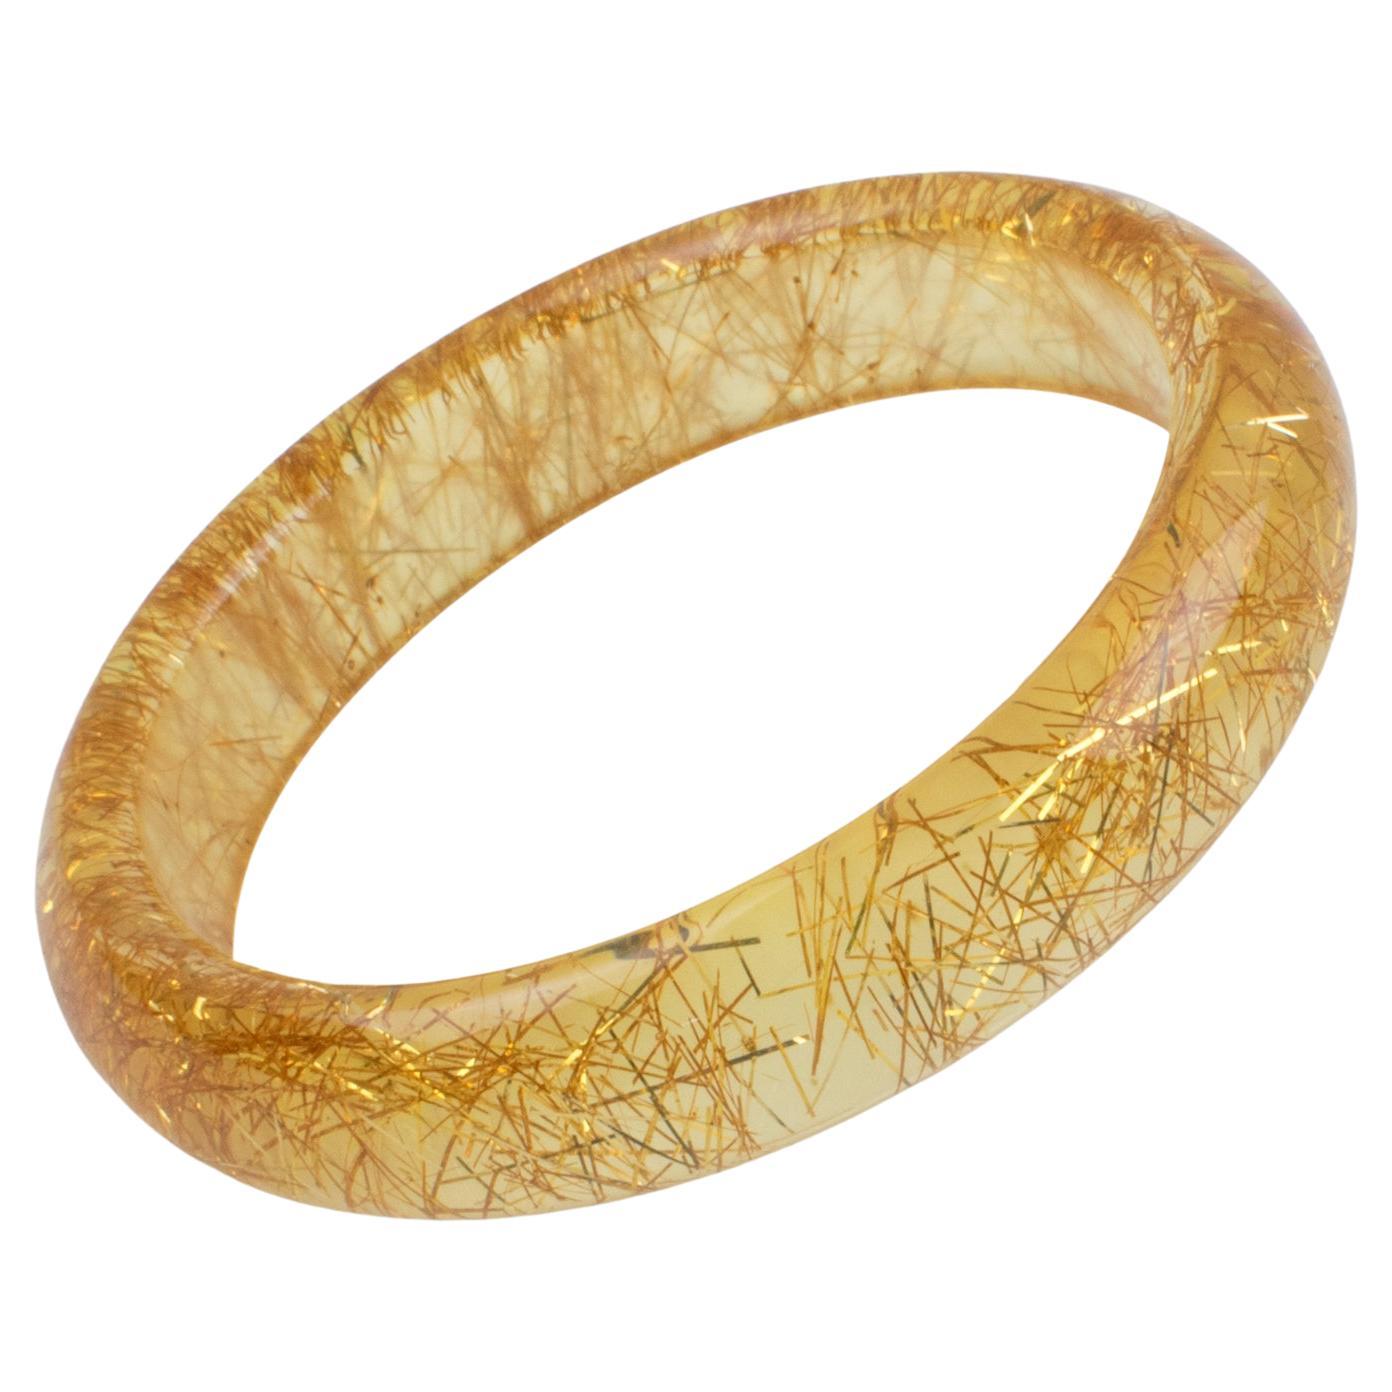 Lucite Bracelet Bangle with Yellow Metallic Thread For Sale